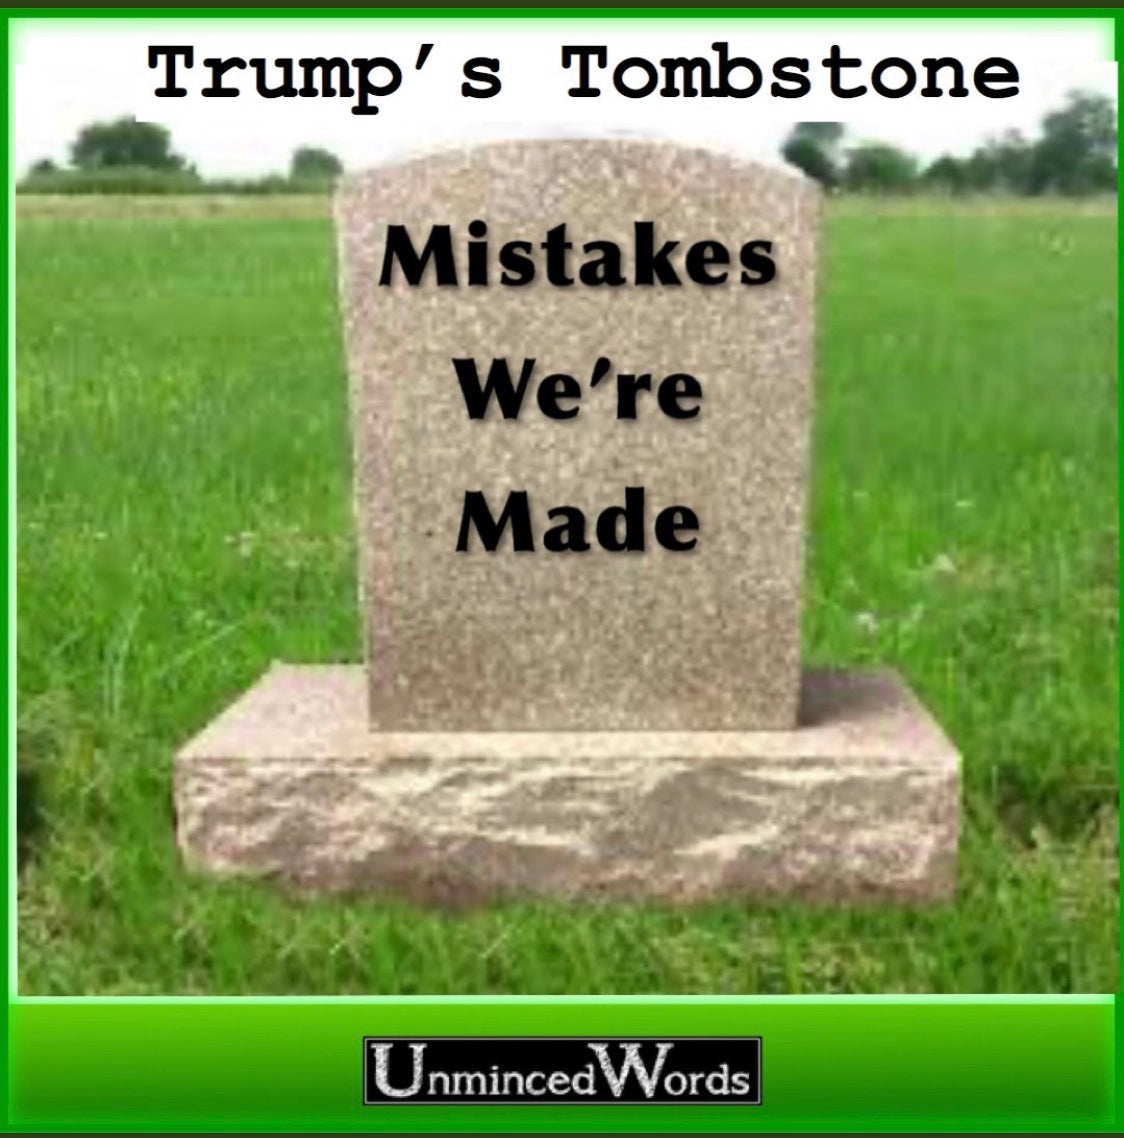 TRUMP’S TOMBSTONE will say these words.